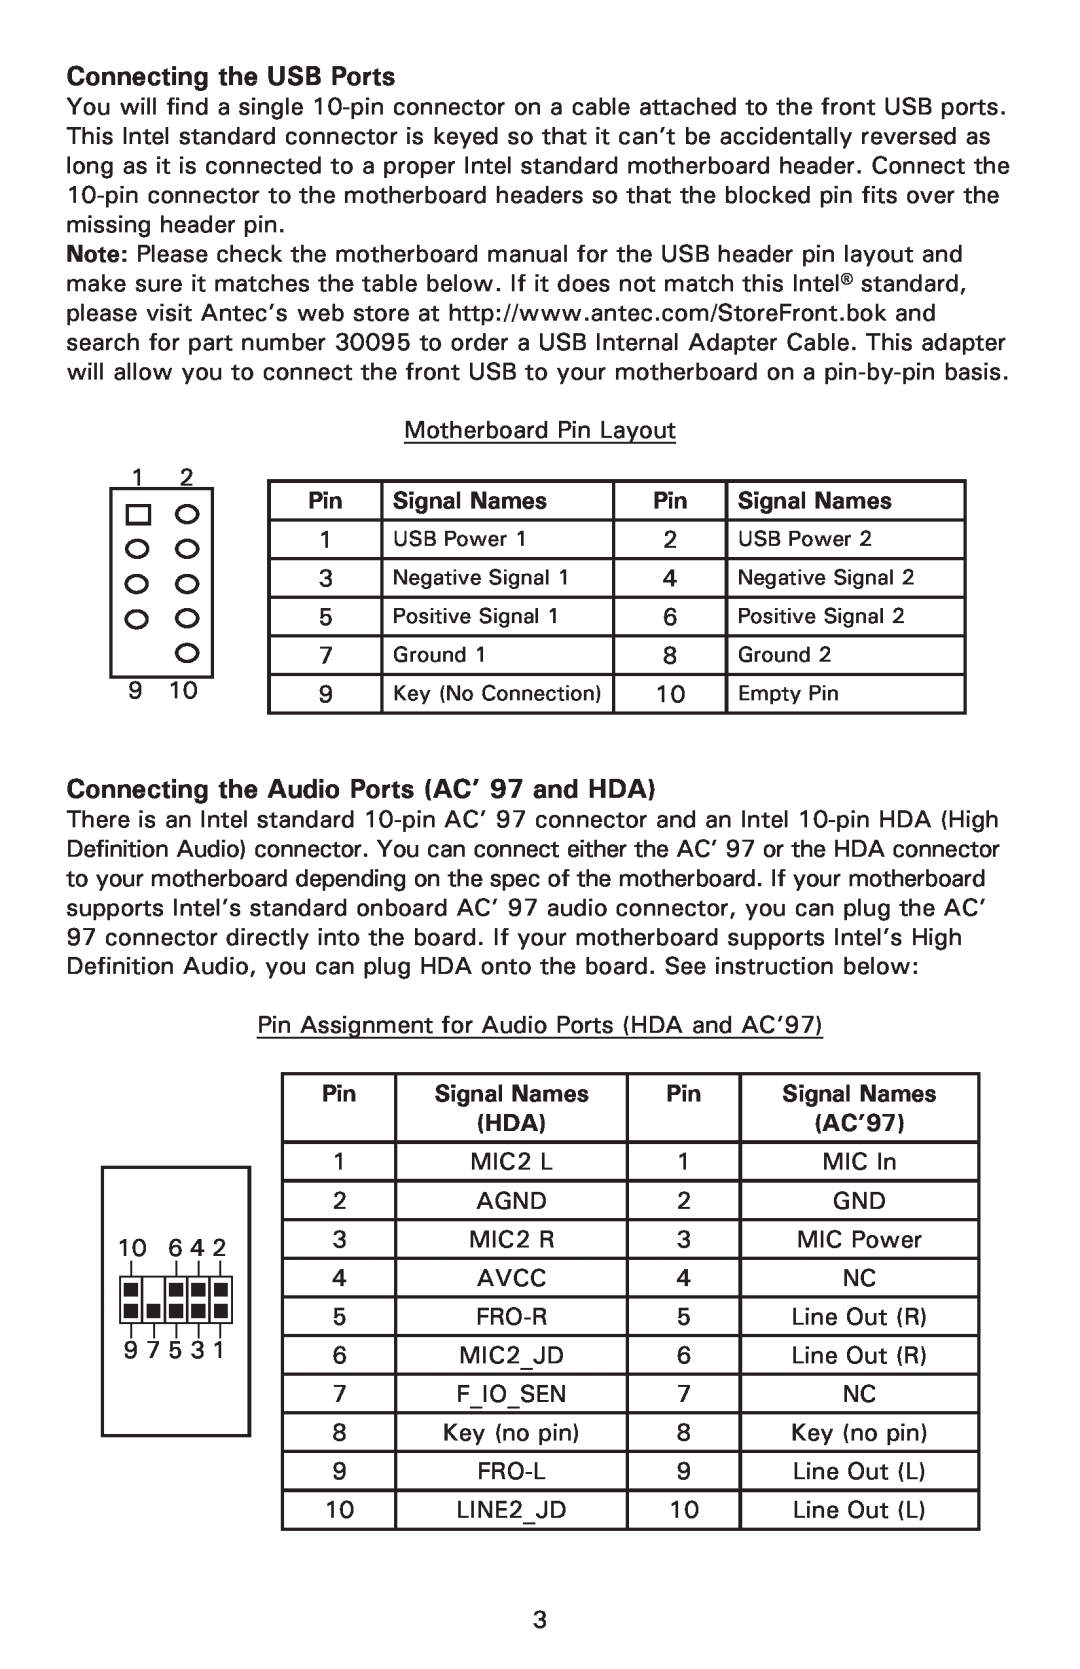 Antec NSK 1480 user manual Connecting the USB Ports, Connecting the Audio Ports AC’ 97 and HDA, Signal Names, AC’97 